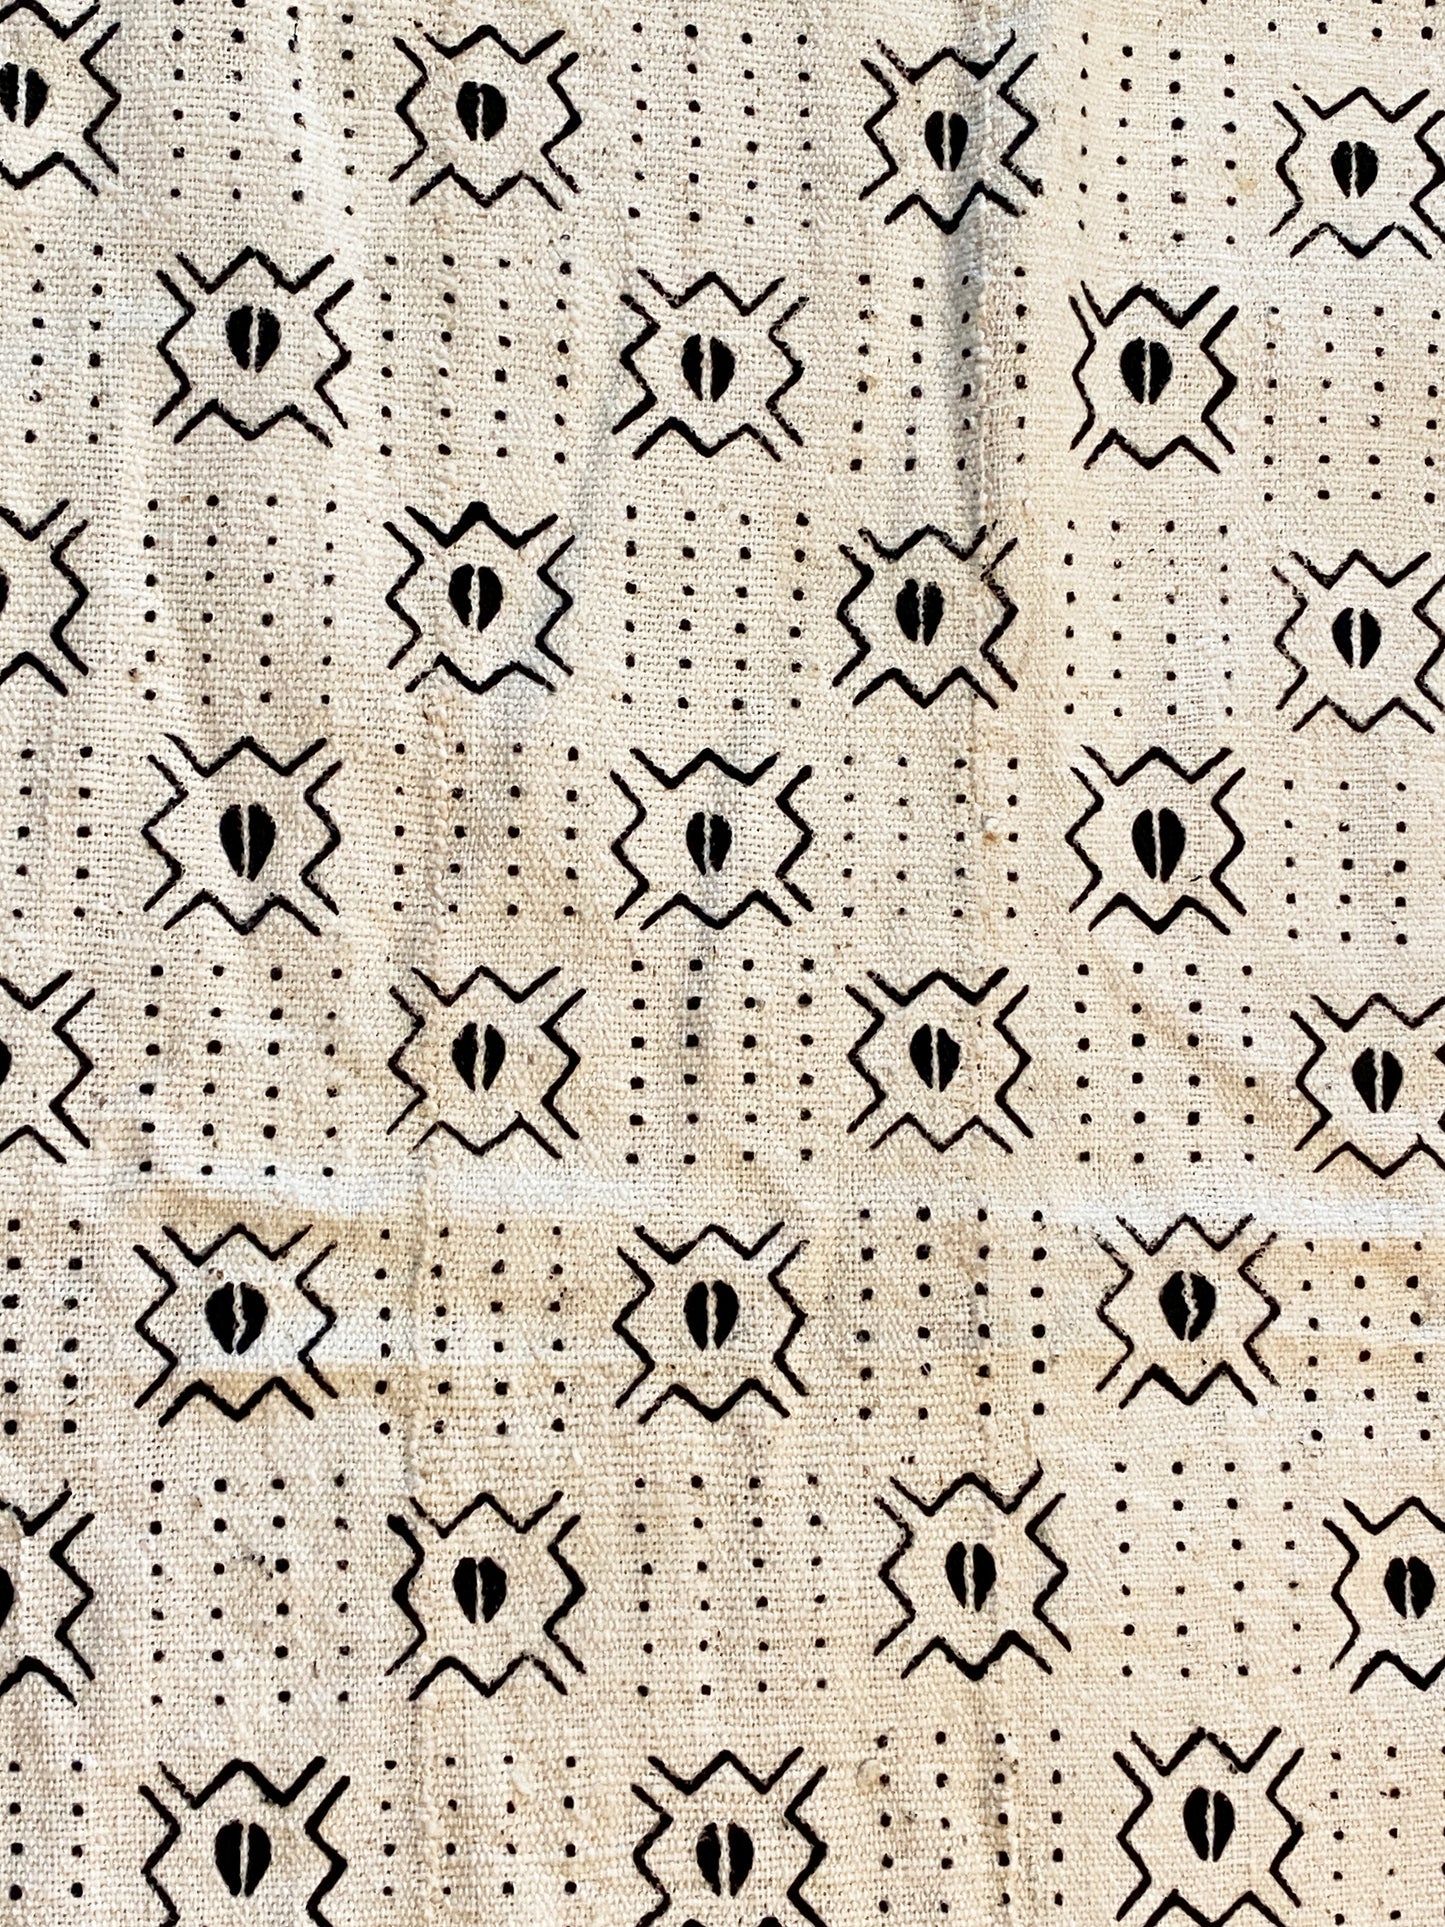 #3793 African Bogolan Black and White Mud Cloth Textile Mali 44" by 63"